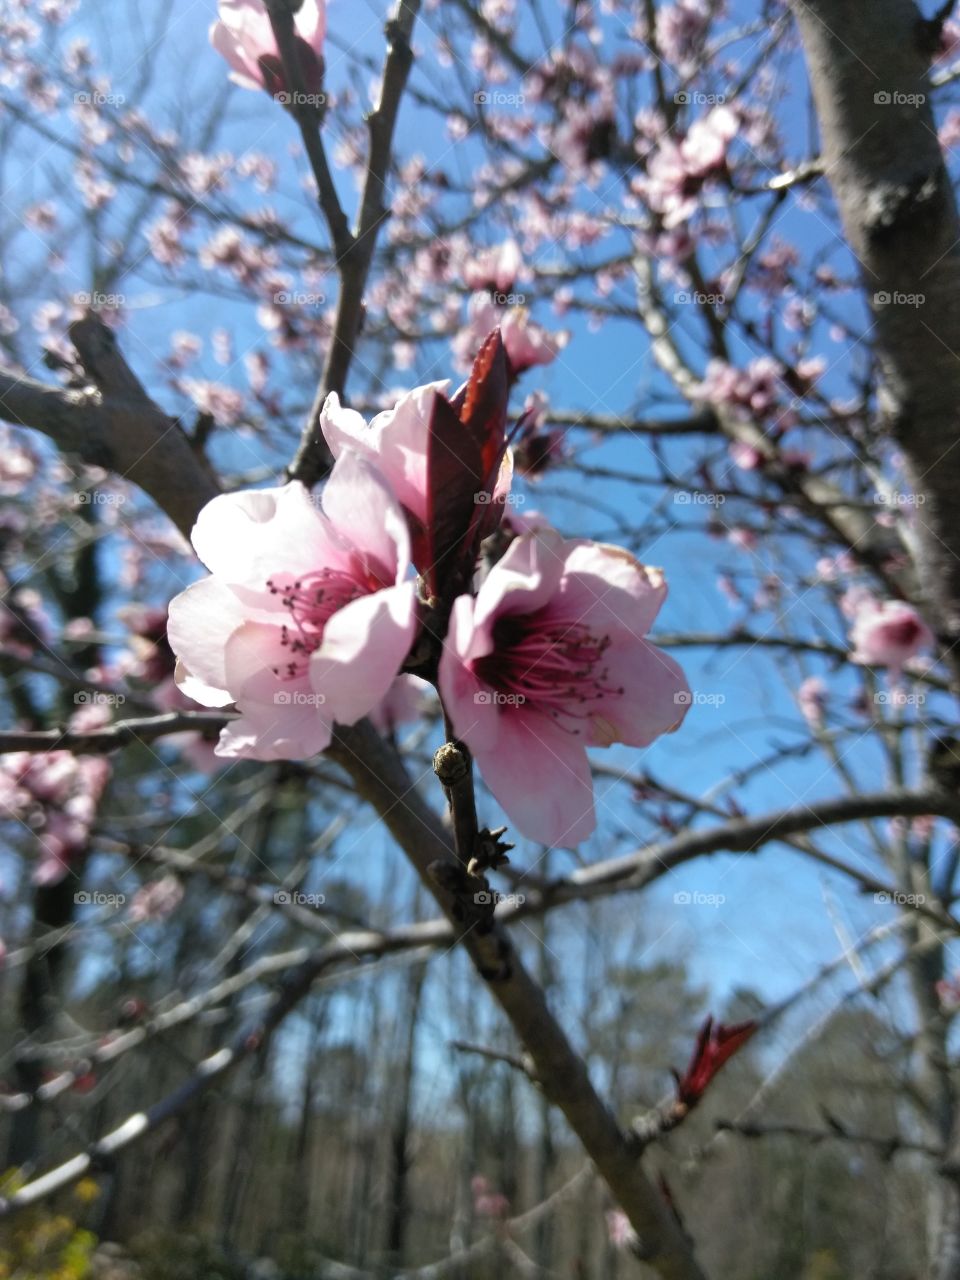 First blooms of spring, barely any other buds are popping but the green pine trees in very distant background. Lovely carolina blue sky to highlight the colors.